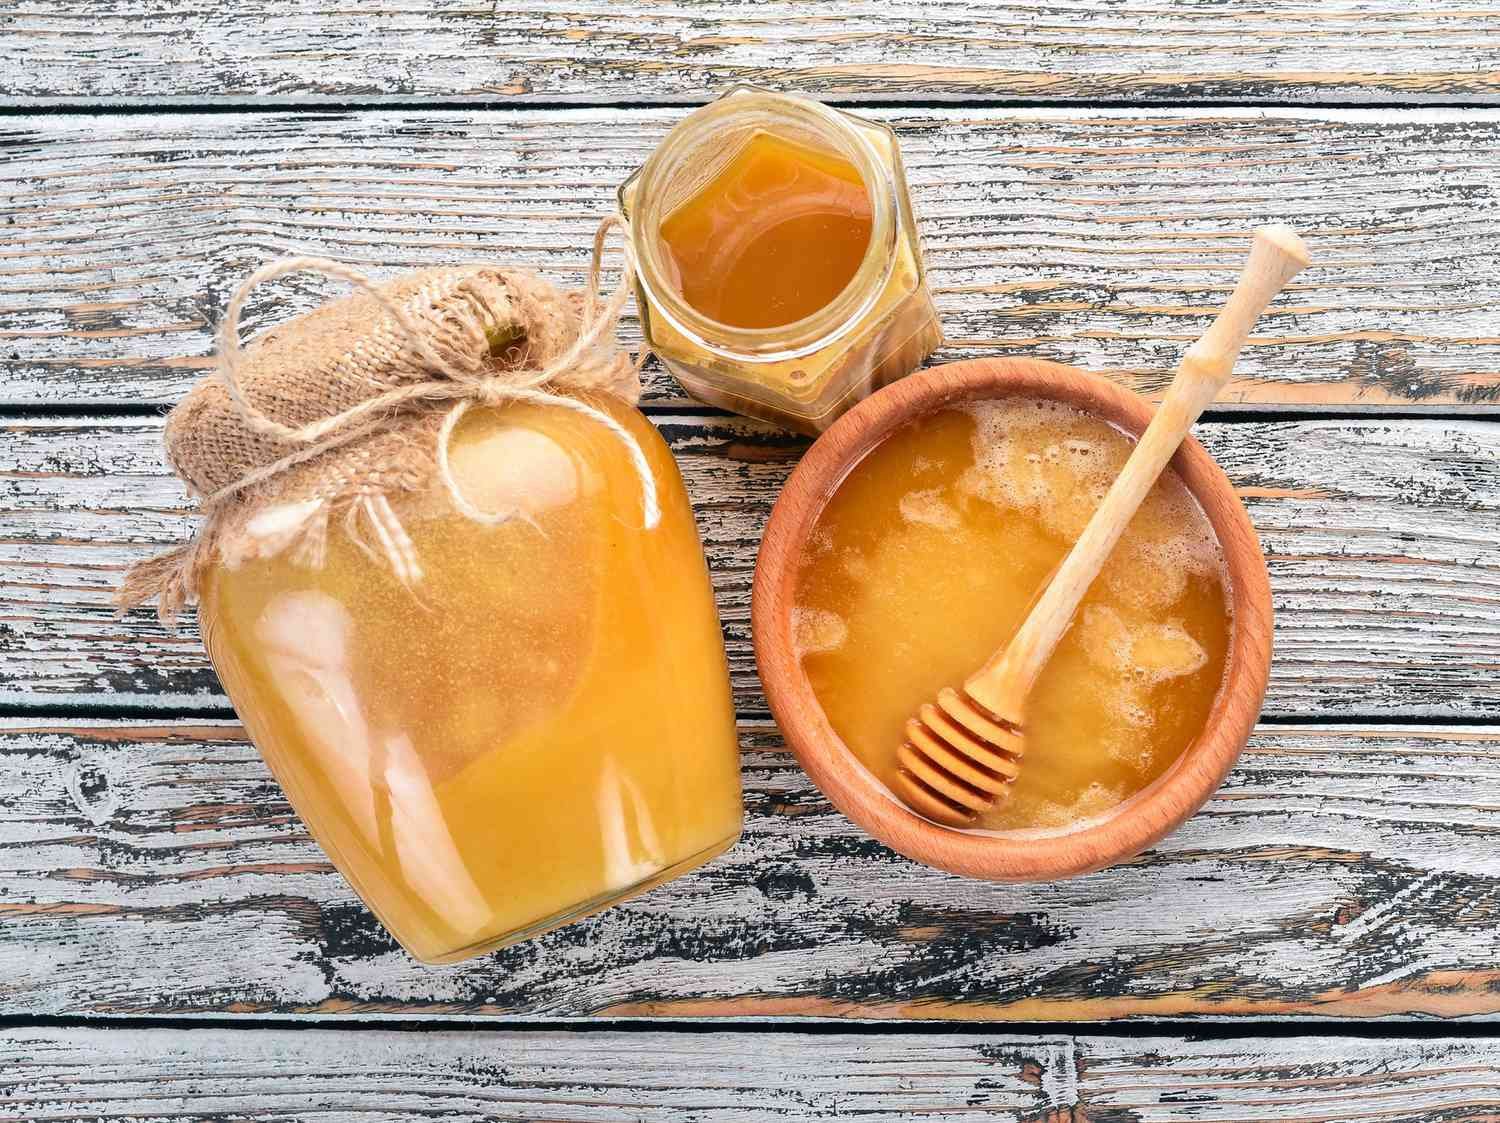 Raw Honey Is Full of Health Benefits, From Antioxidants to Anti-inflammation